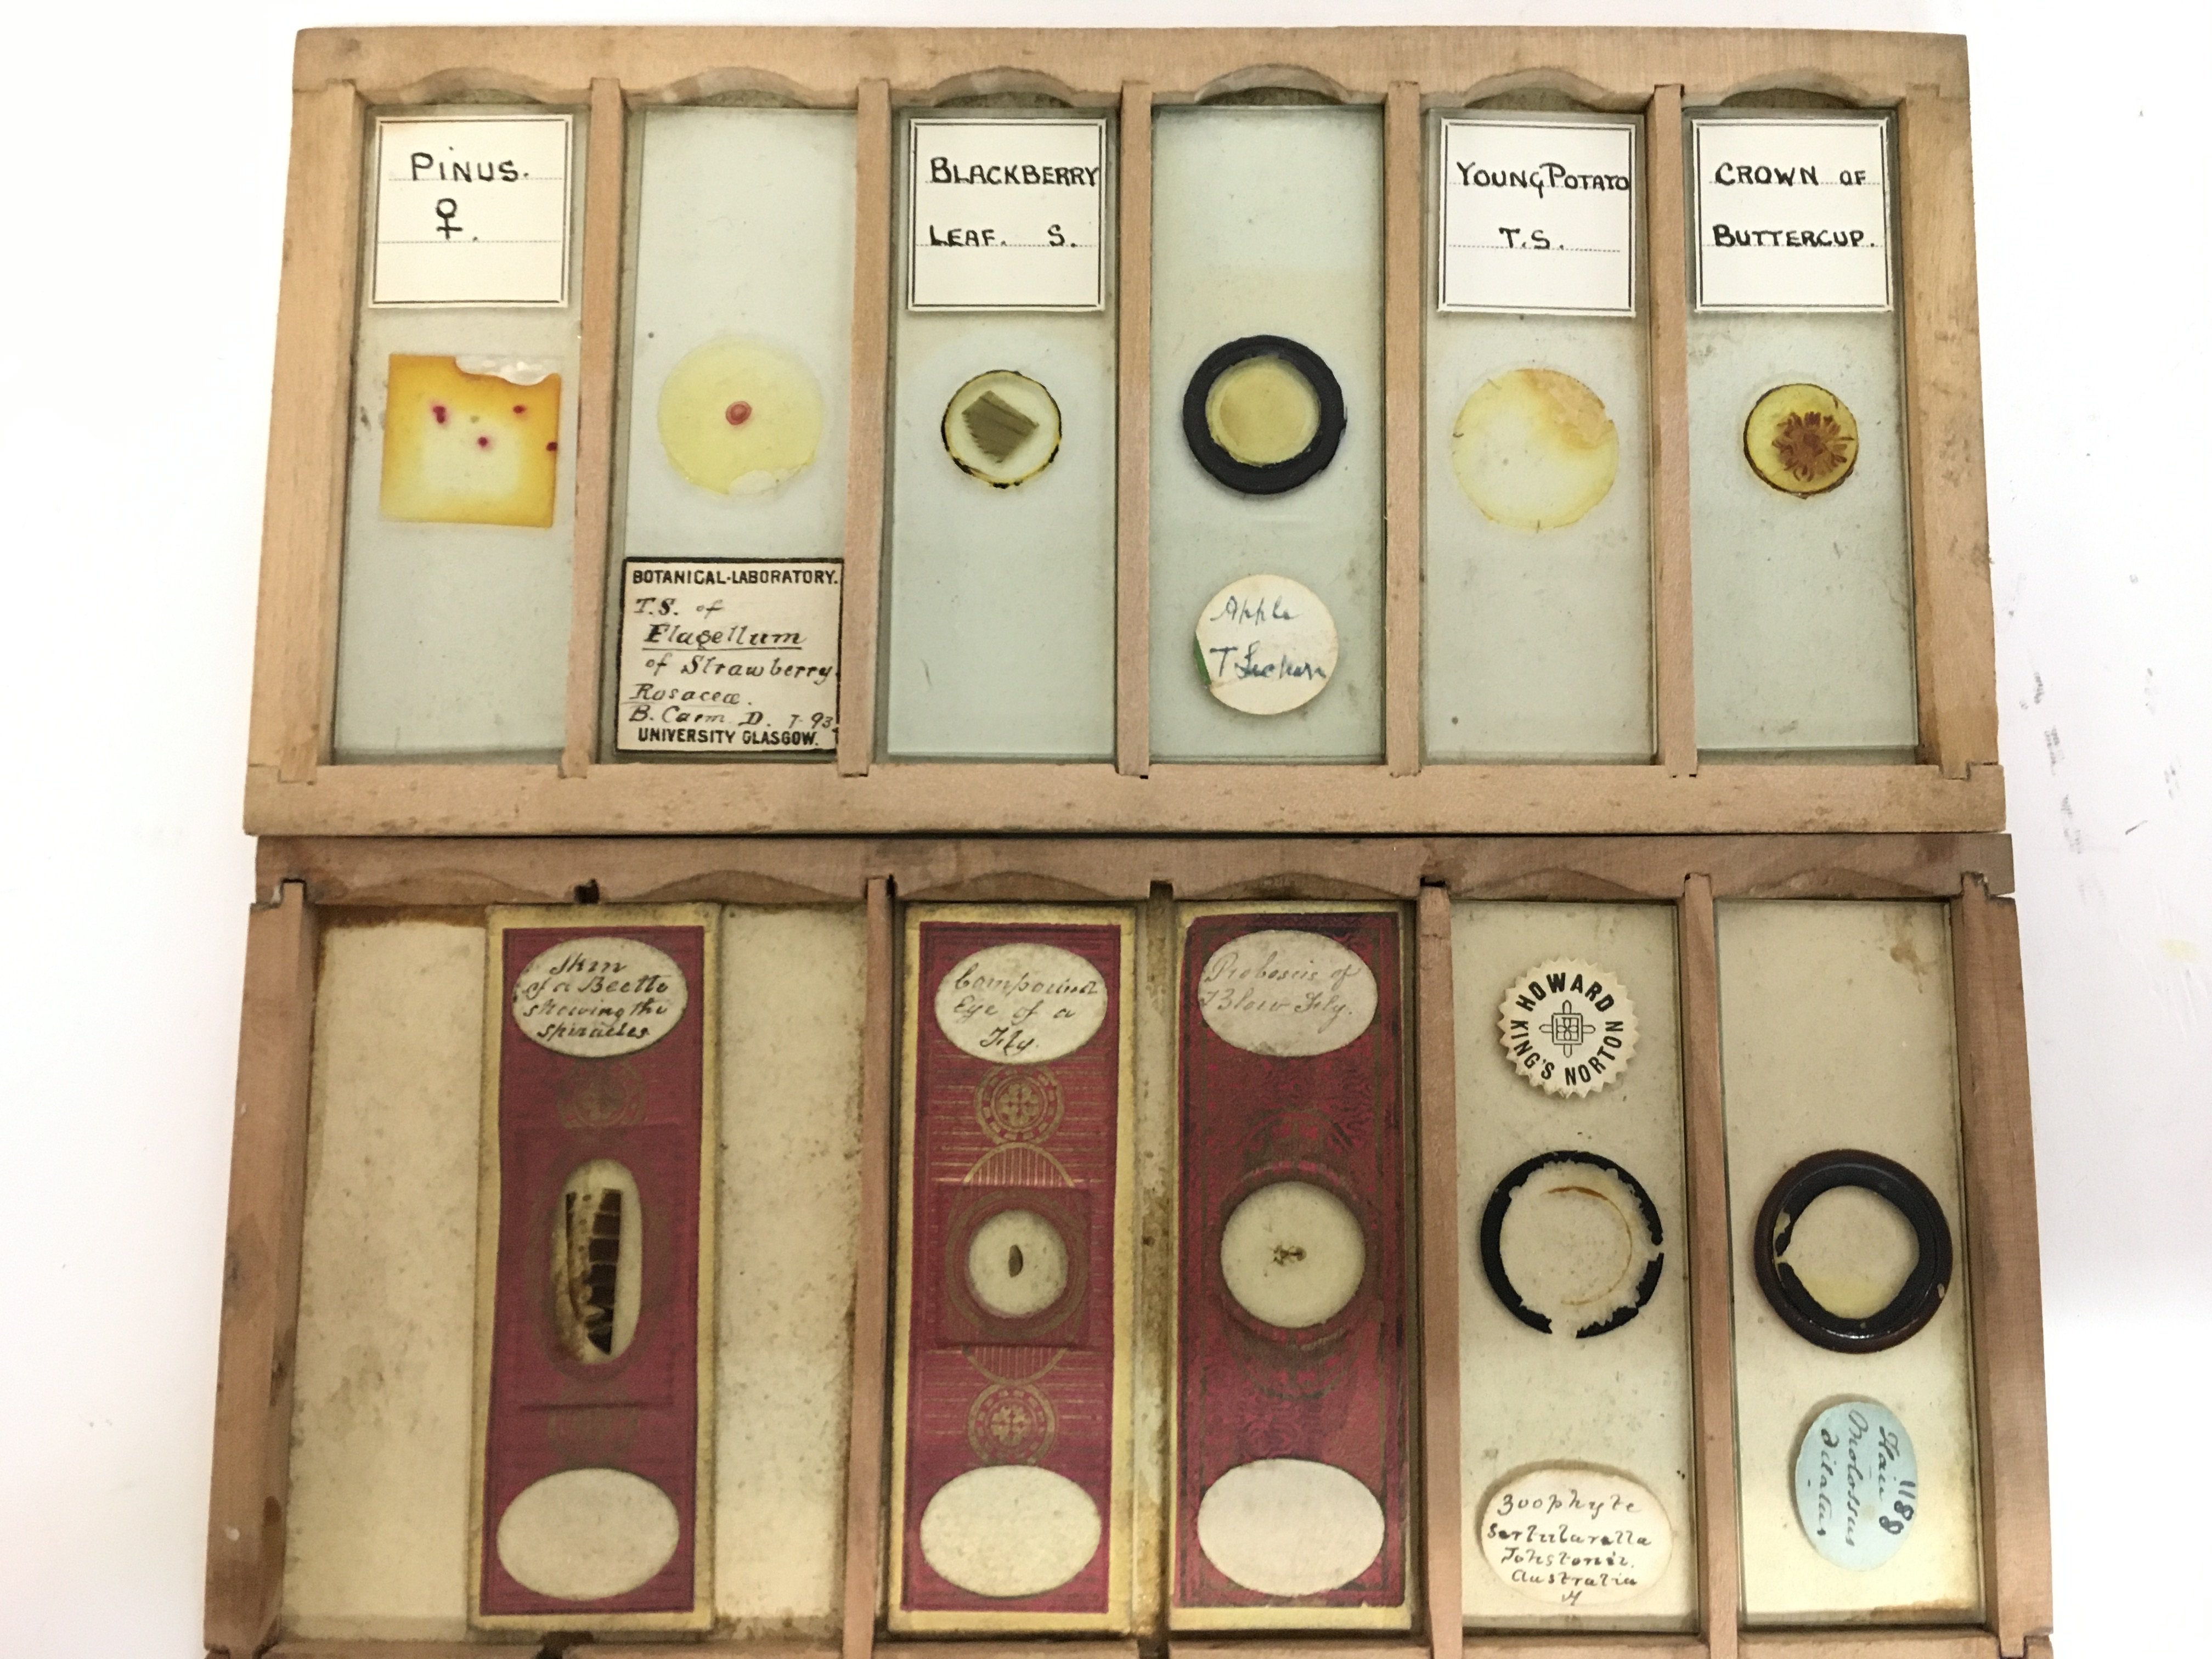 A collection of Victorian Botany and Mineral slide - Image 4 of 5